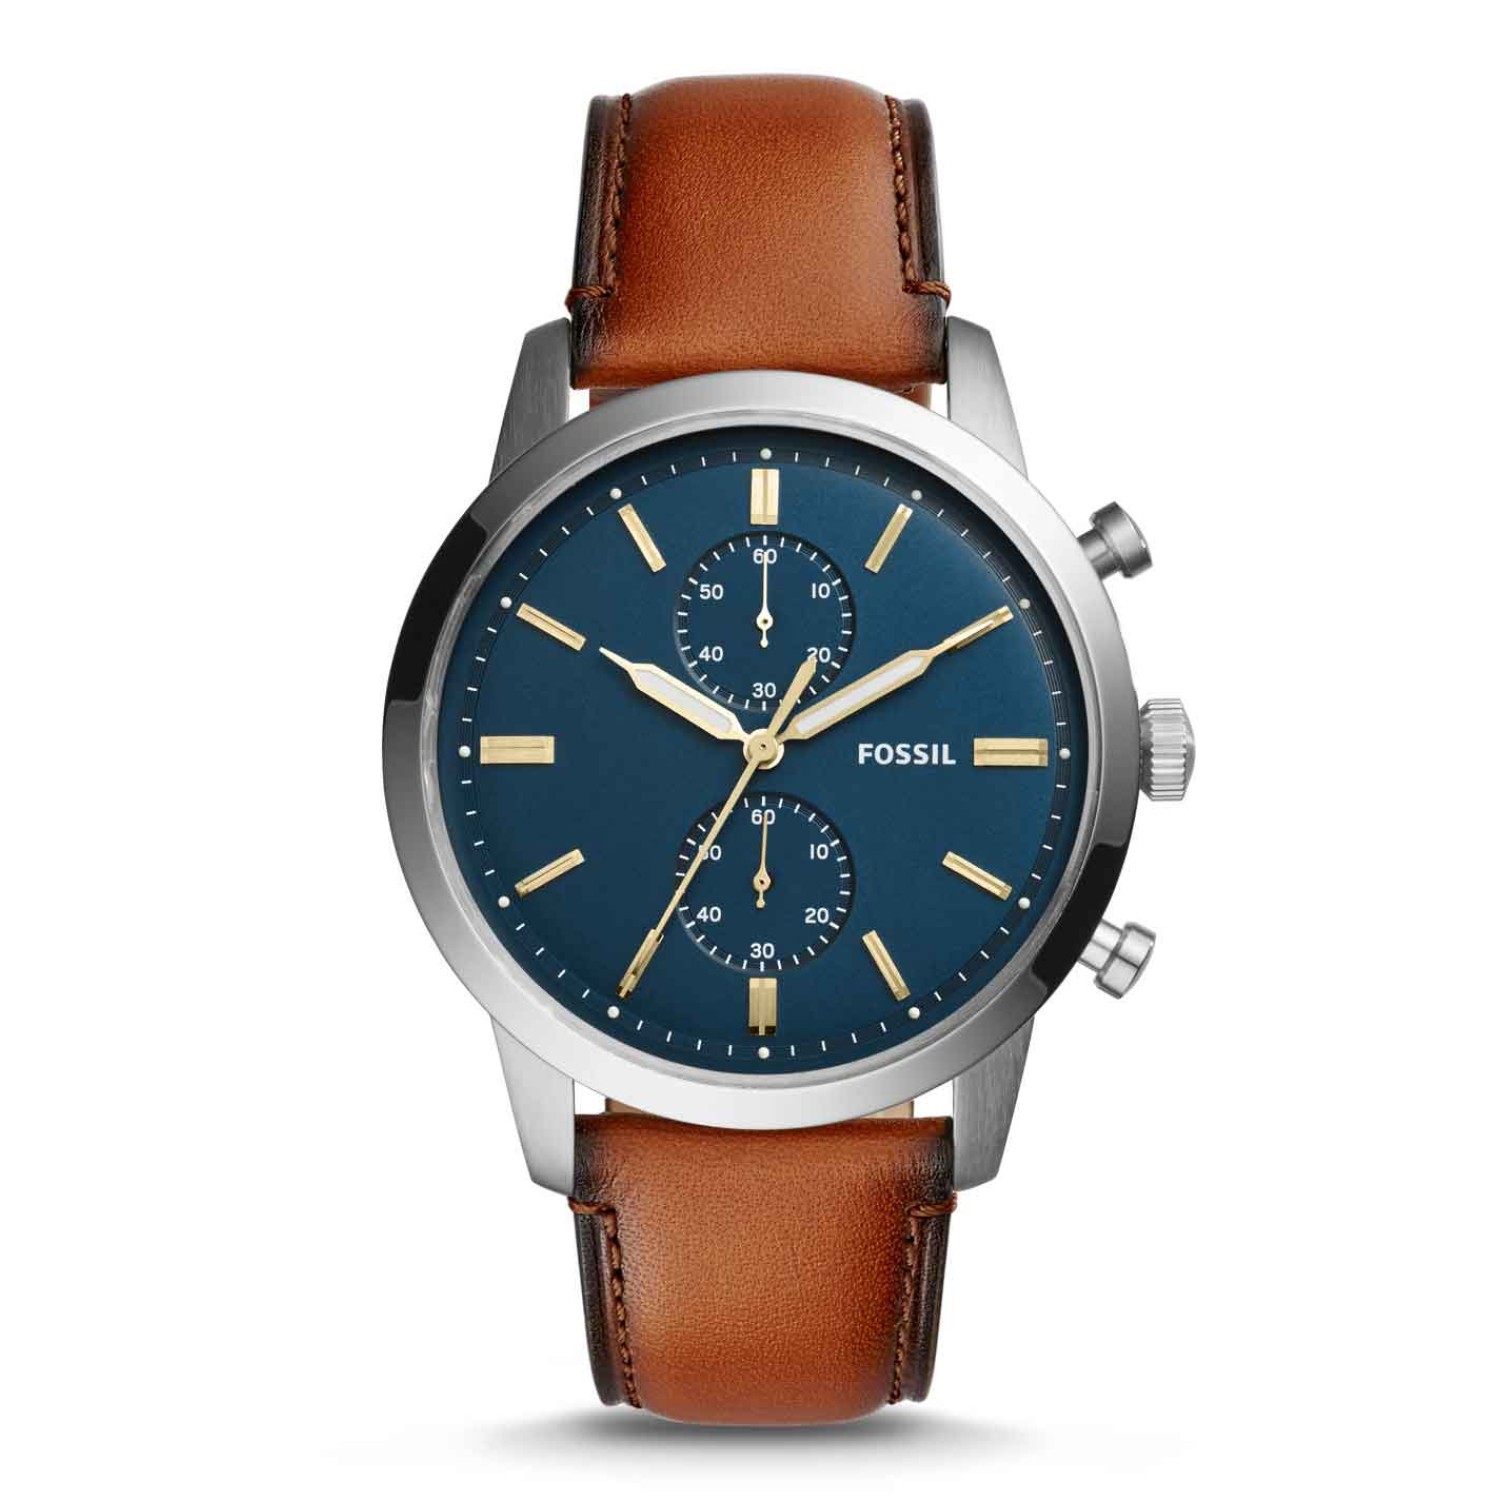 FS5279P Fossil Townsman Chronograph Luggage Leather Watch. With a minimalistic approach based on the 1960s, Fossils Townsman dress watch has a symmetrical style, drawing attention to its refined construction, like its elegantly vaulted hands, two-eye chro